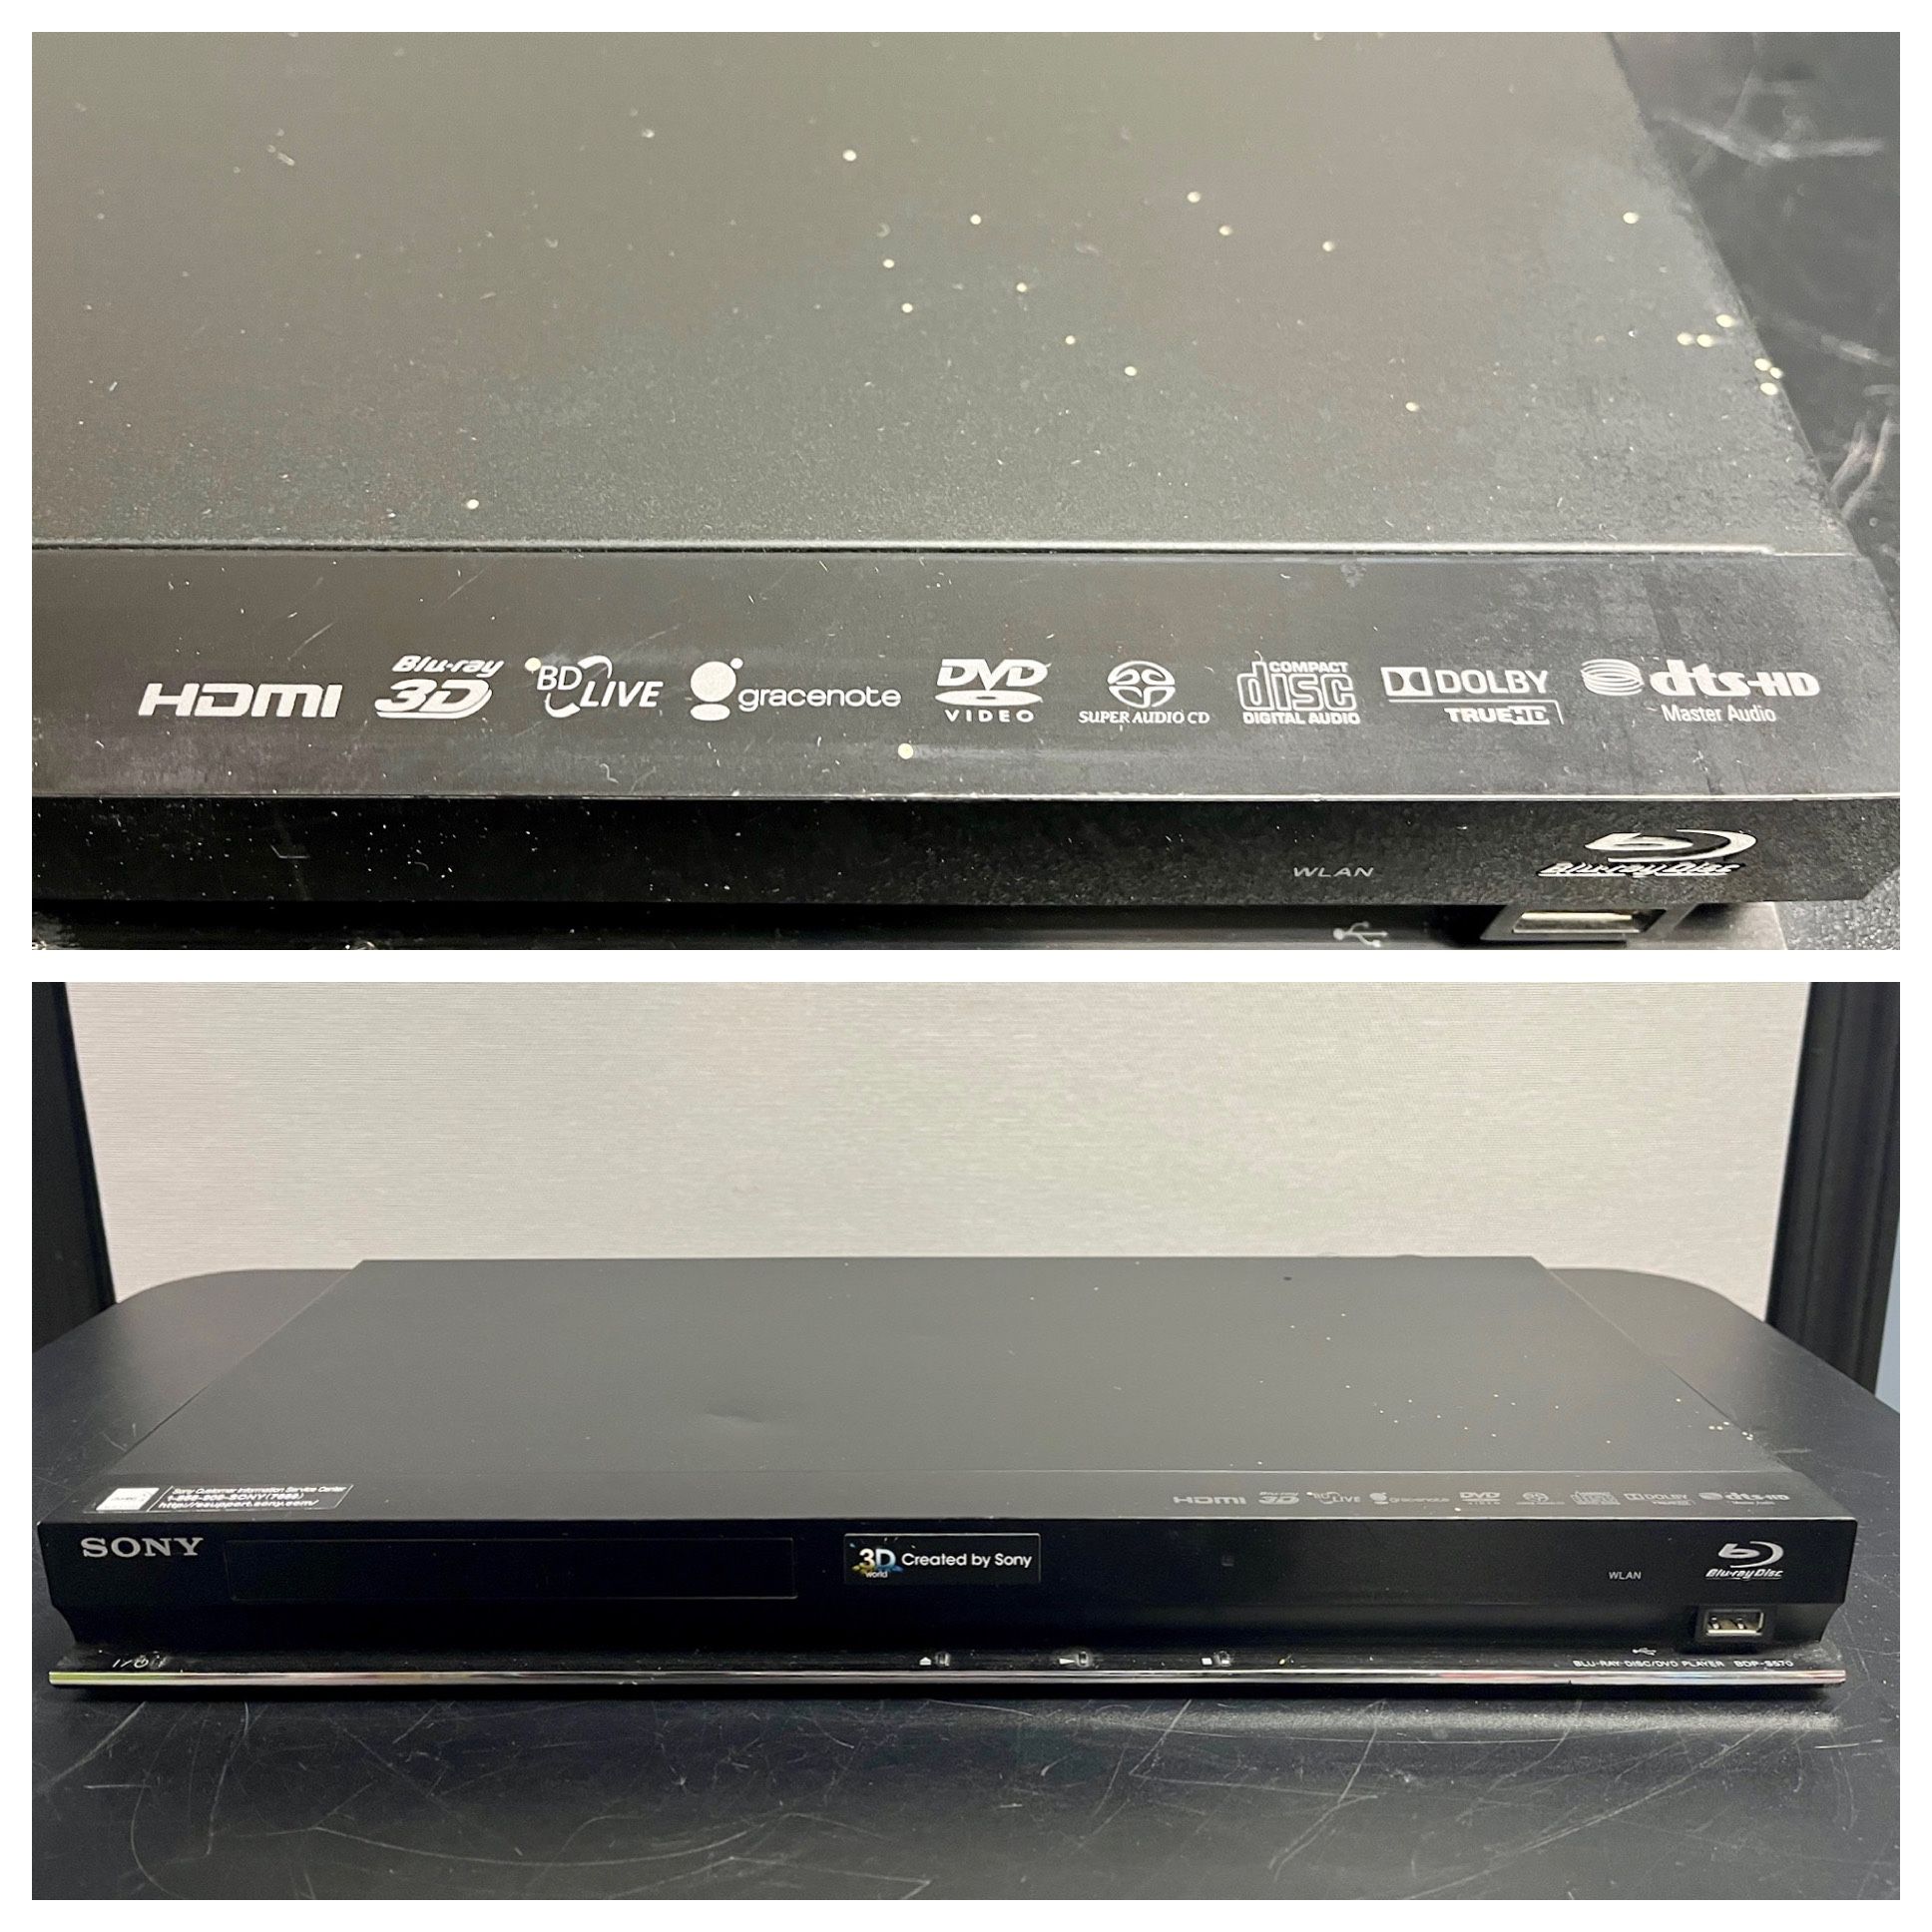 Sony BDP-S570 Internet-ready Blu-ray Disc player with built-in Wi-Fi, 3D-ready. Optional brand new, factory sealed, universal remote for $10 extra. Se